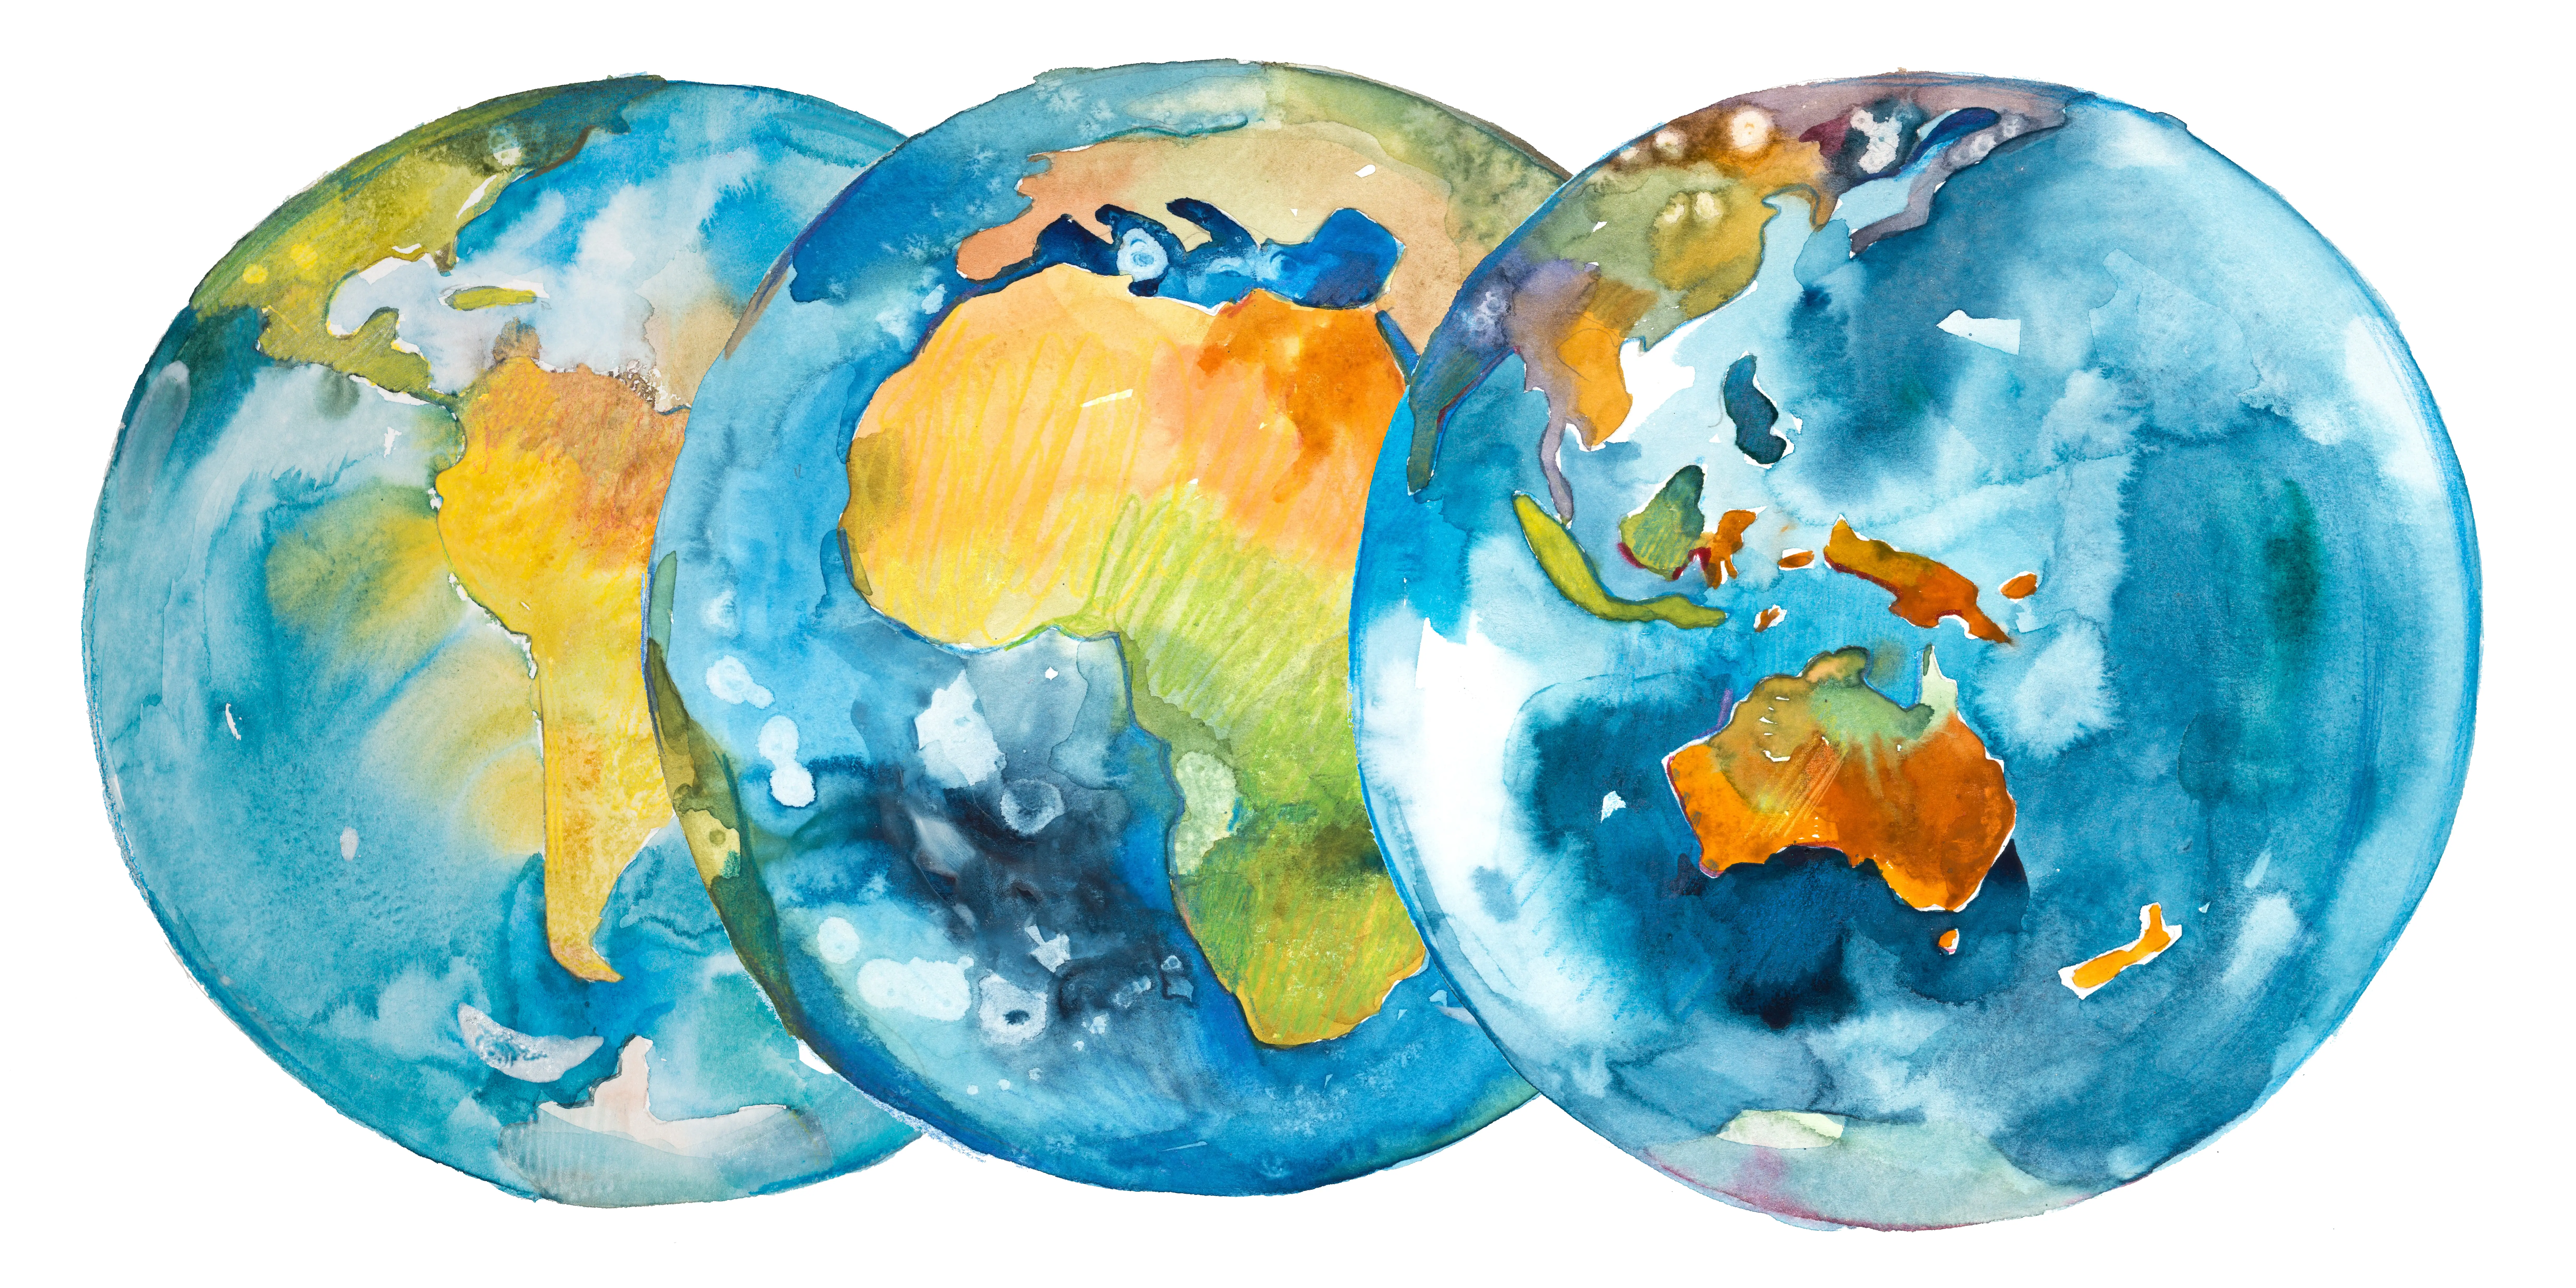 Watercolor image of the globe, looking at Australia and the South Pacific.